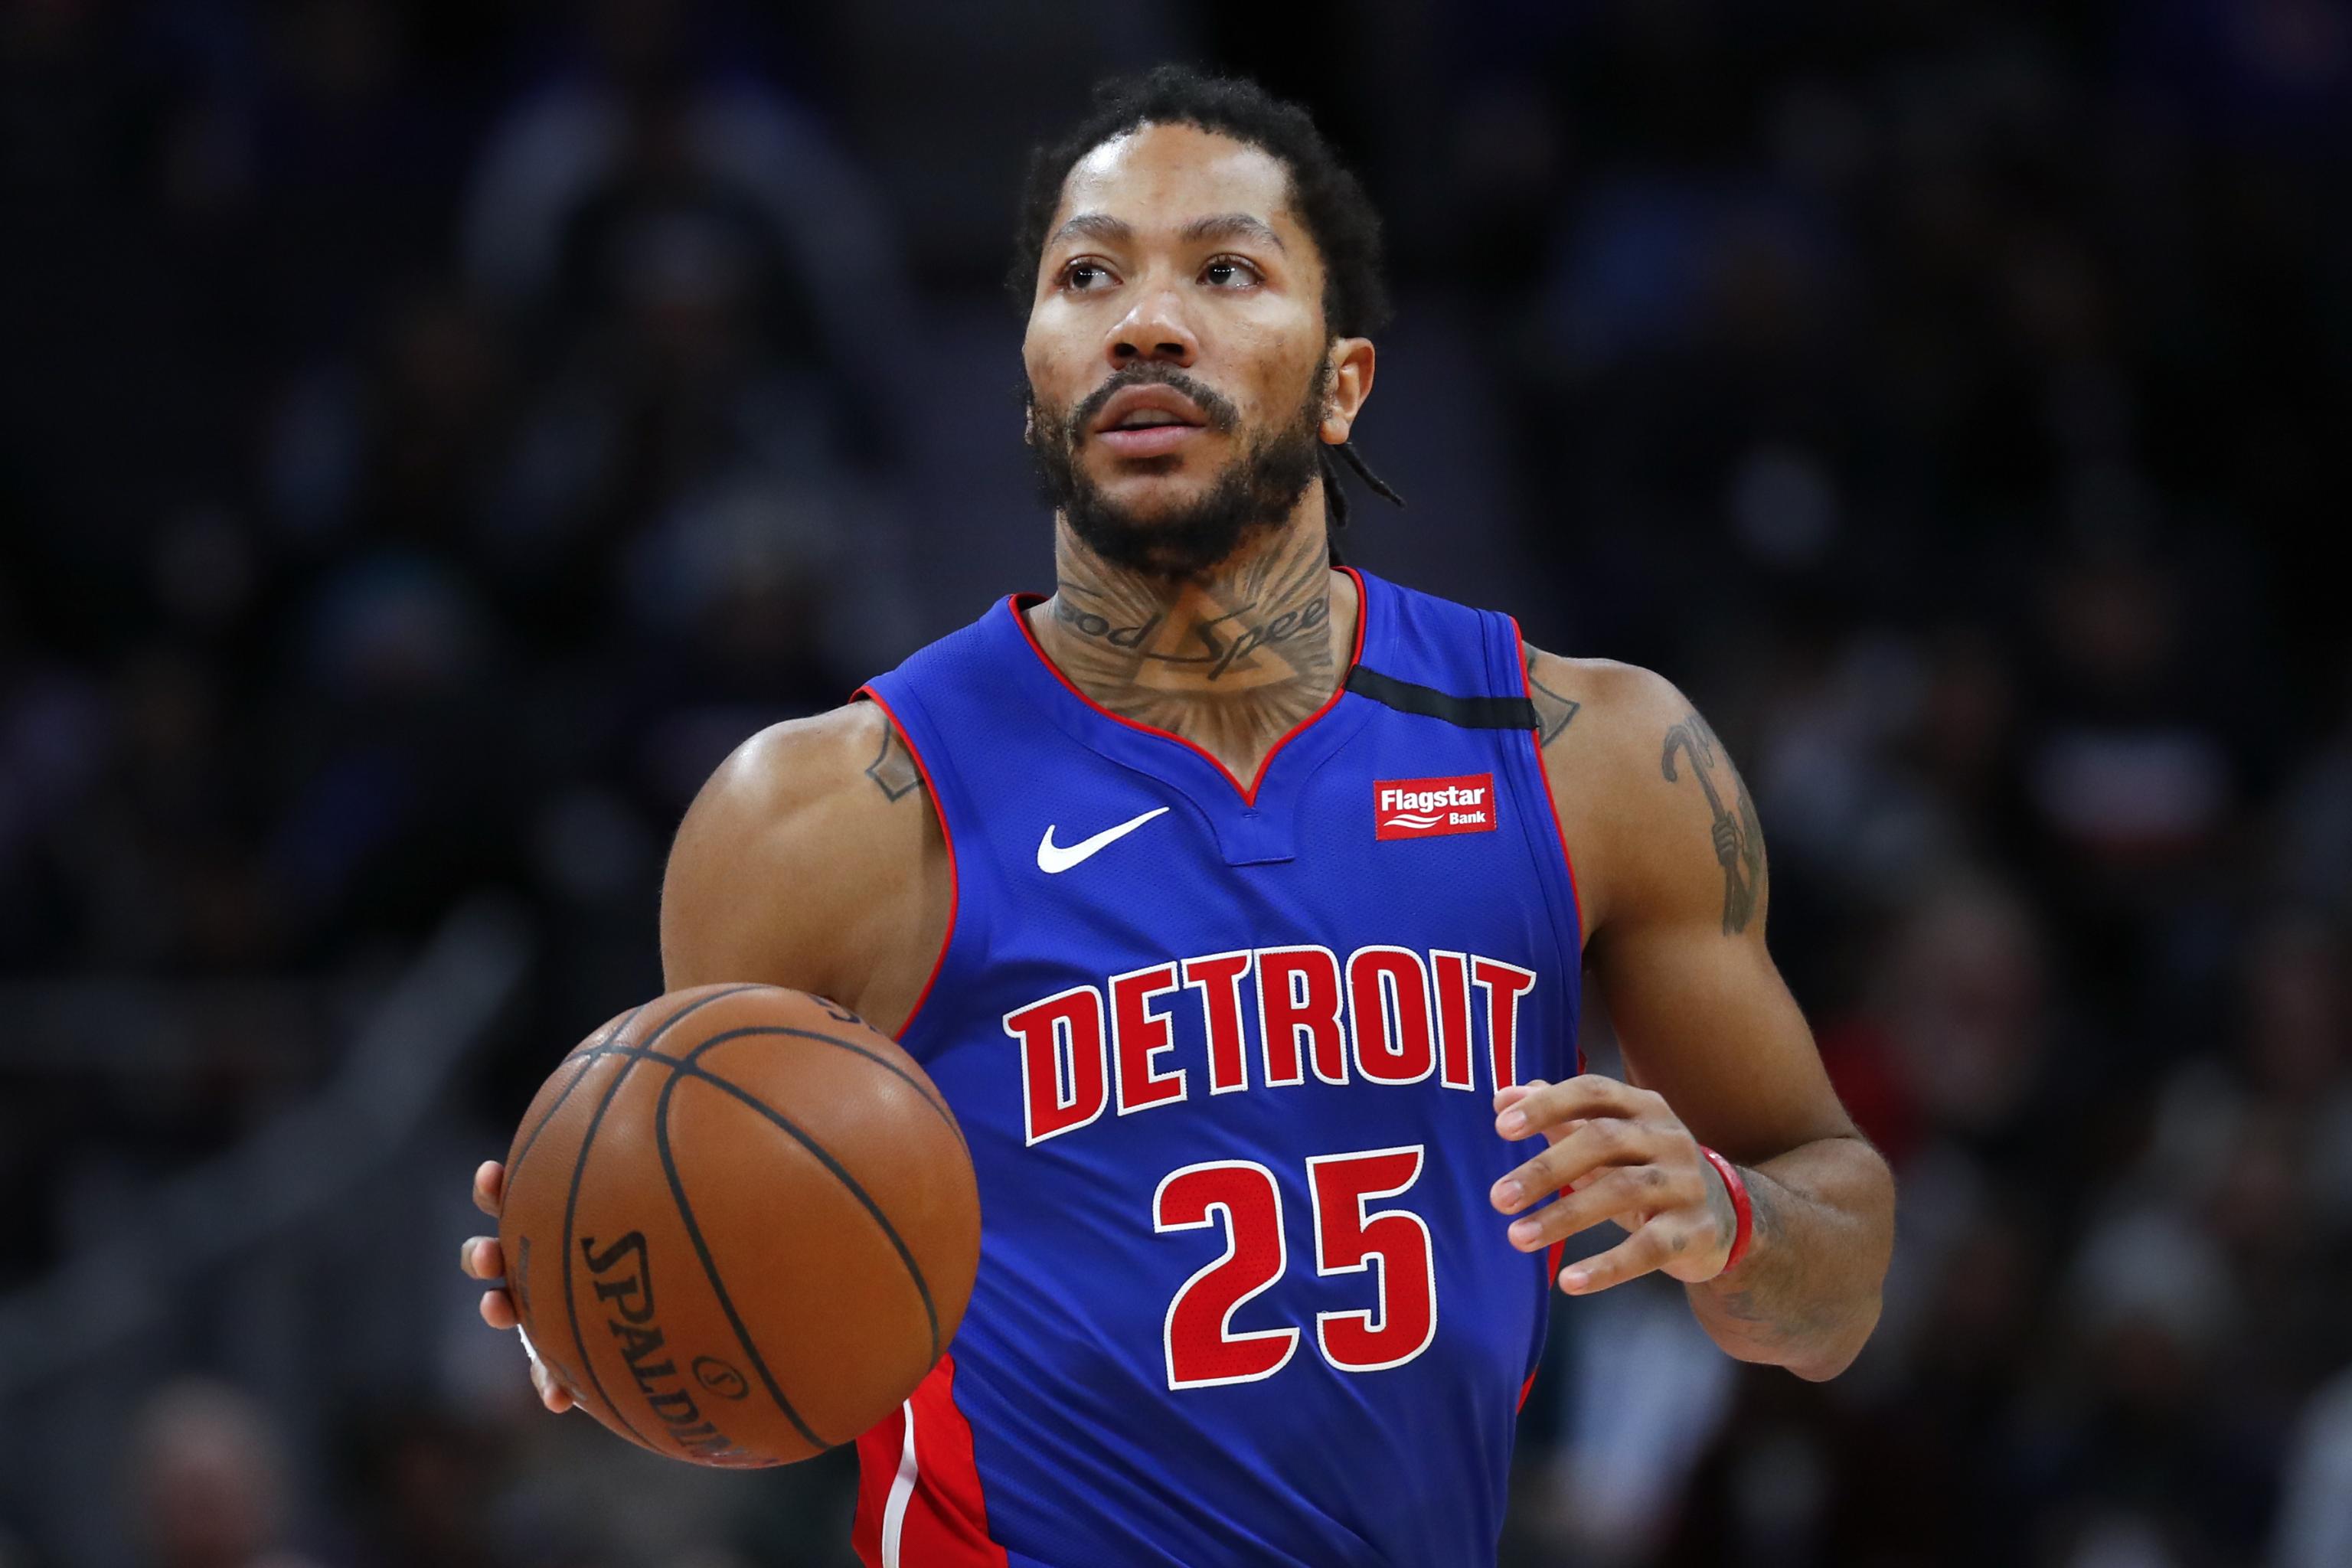 Derrick Rose Says He Wants to Stay with Pistons Amid Trade Rumors